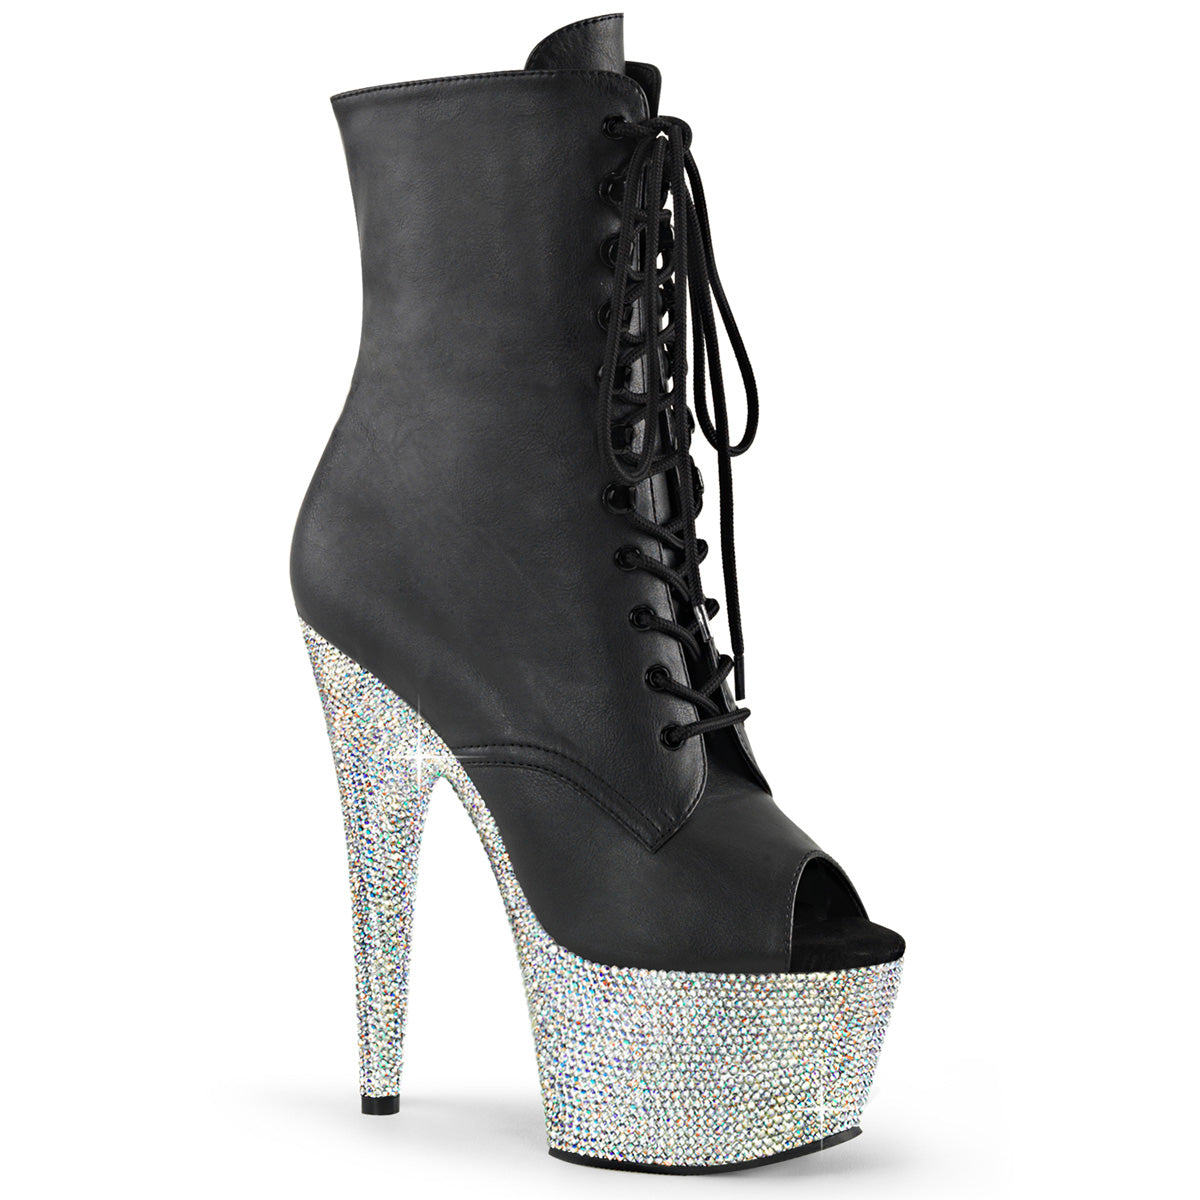 BEJEWELED-1021-7 Pleaser Black Faux Leather Ankle Boots Platforms (Exotic Dancing)